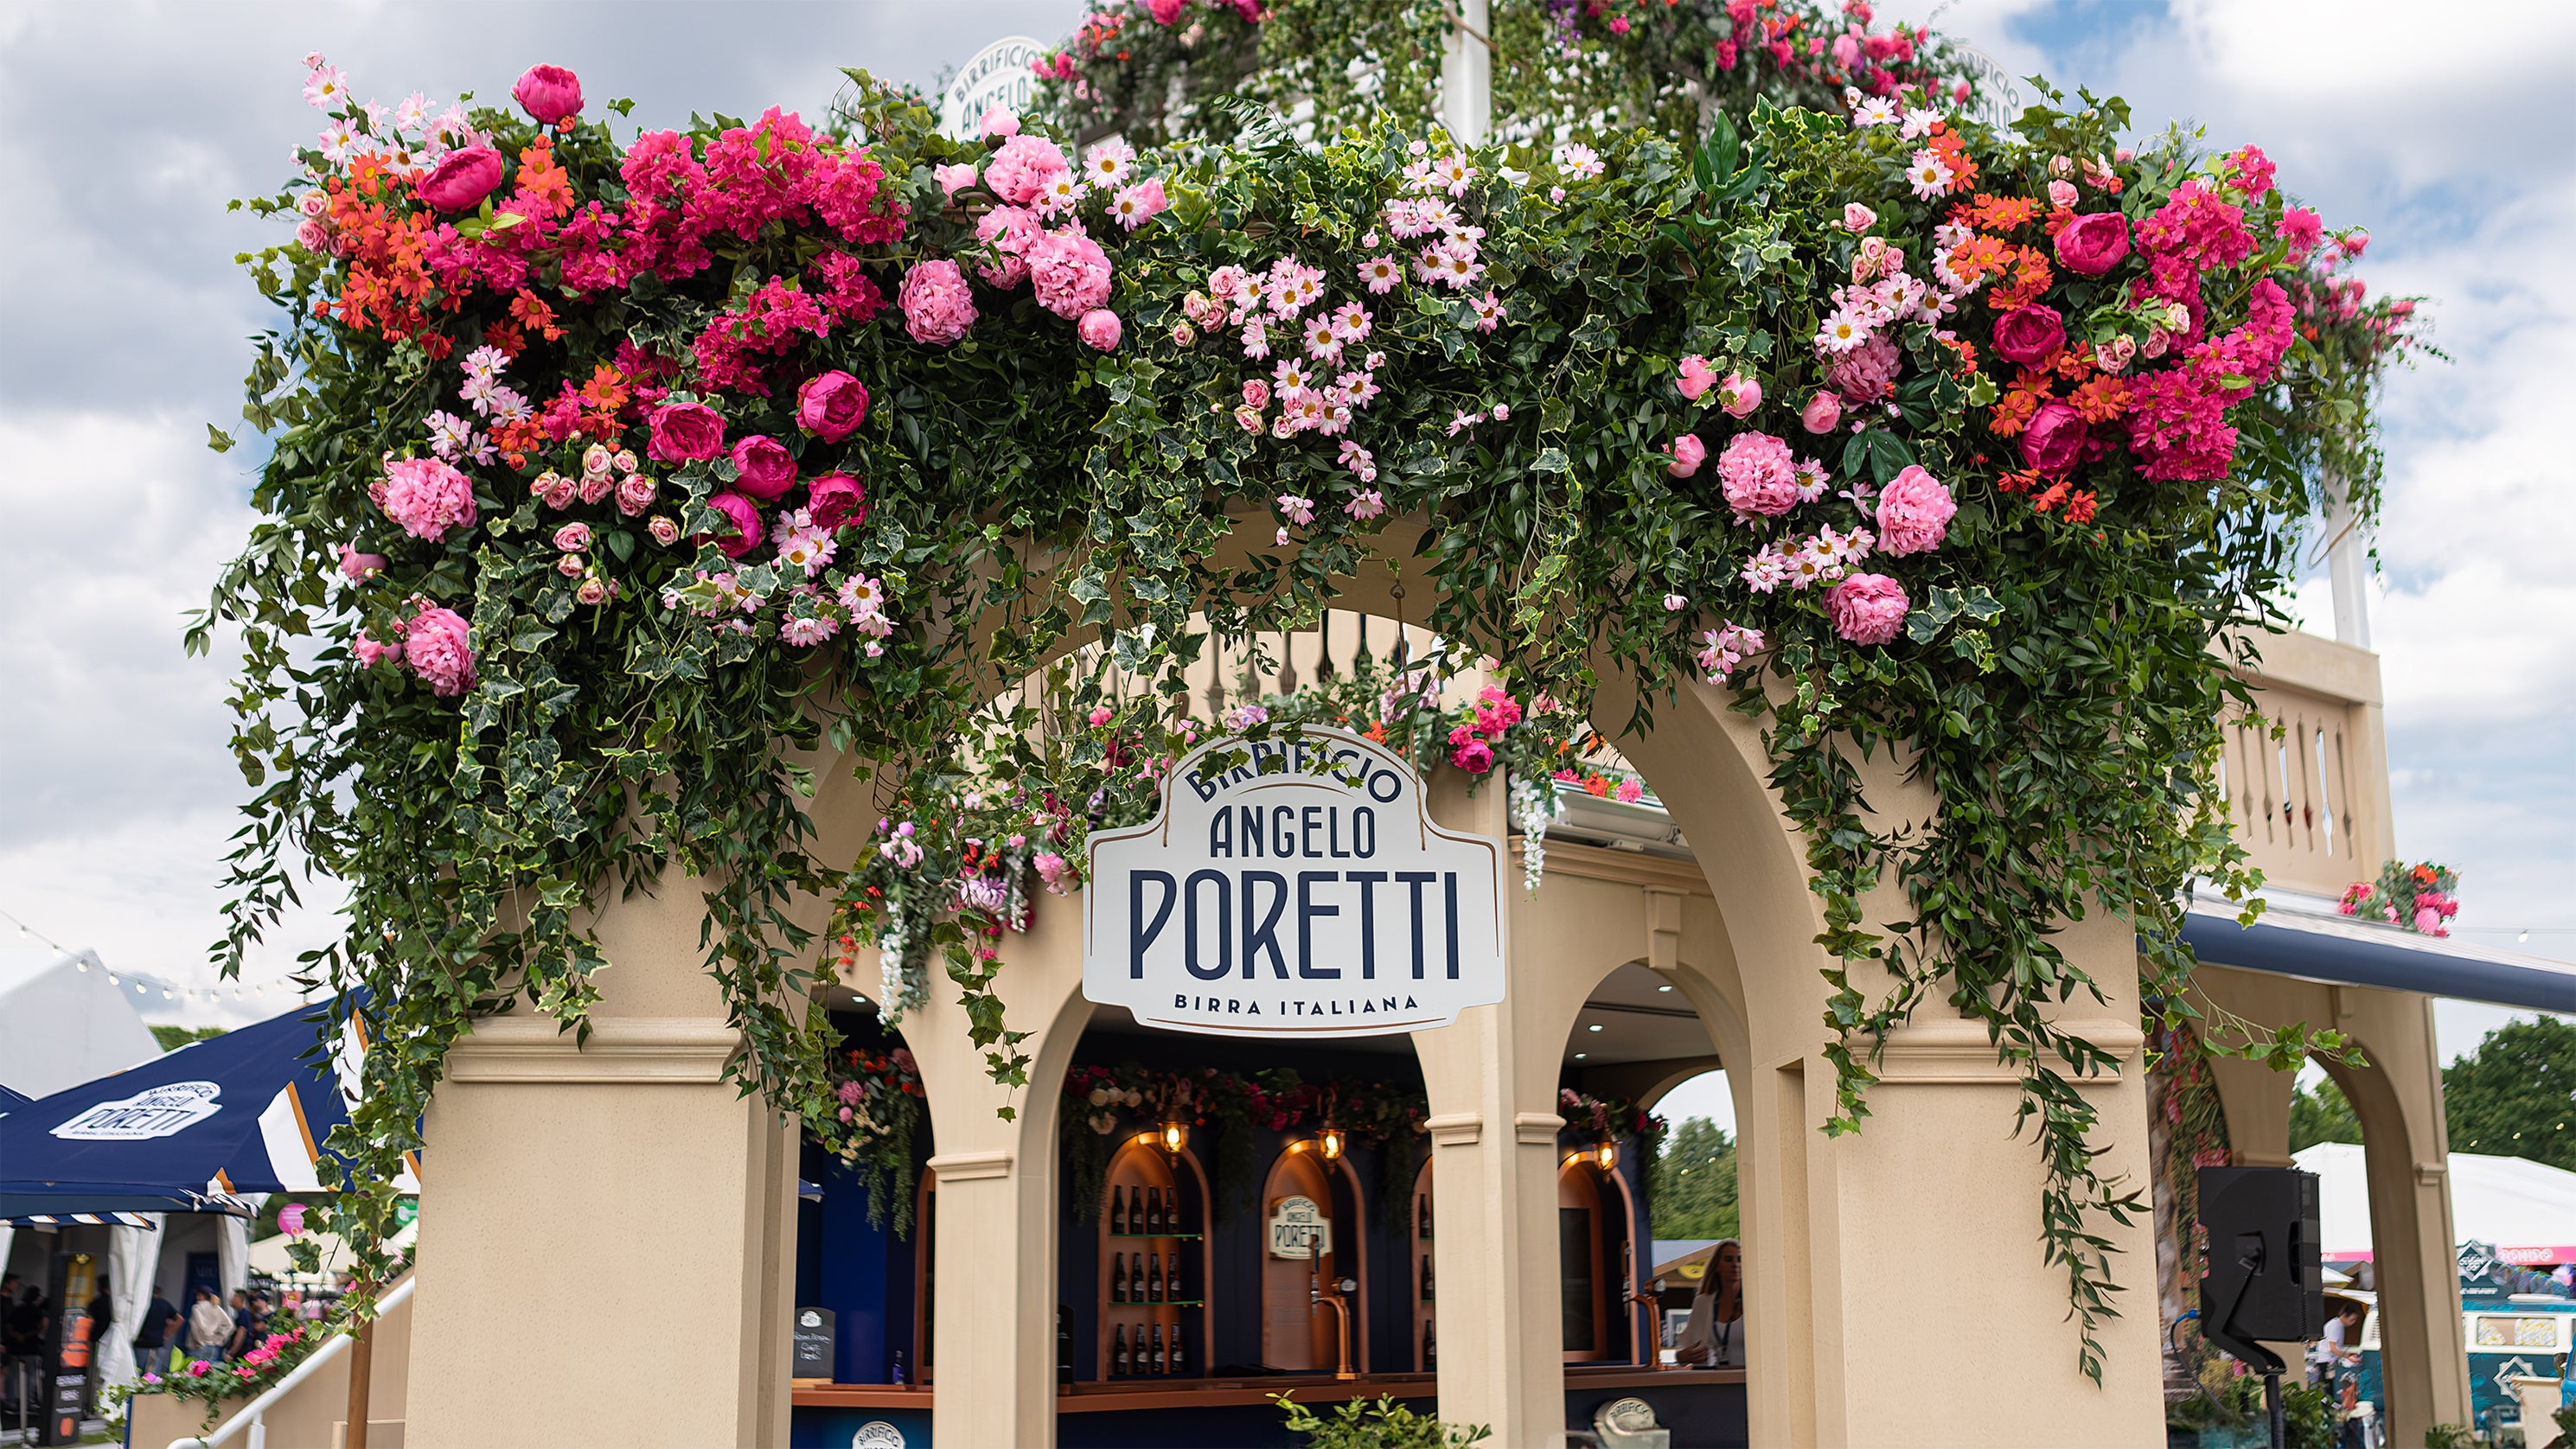 This is a close-up of the Angelo Poretti sign at Regent’s Park Taste Festival. Above the archway, lush green ivy and vibrant flowers in shades of pink, red, and orange create a welcoming atmosphere—bespoke floral arrangements by Event Florist Amaranté London.